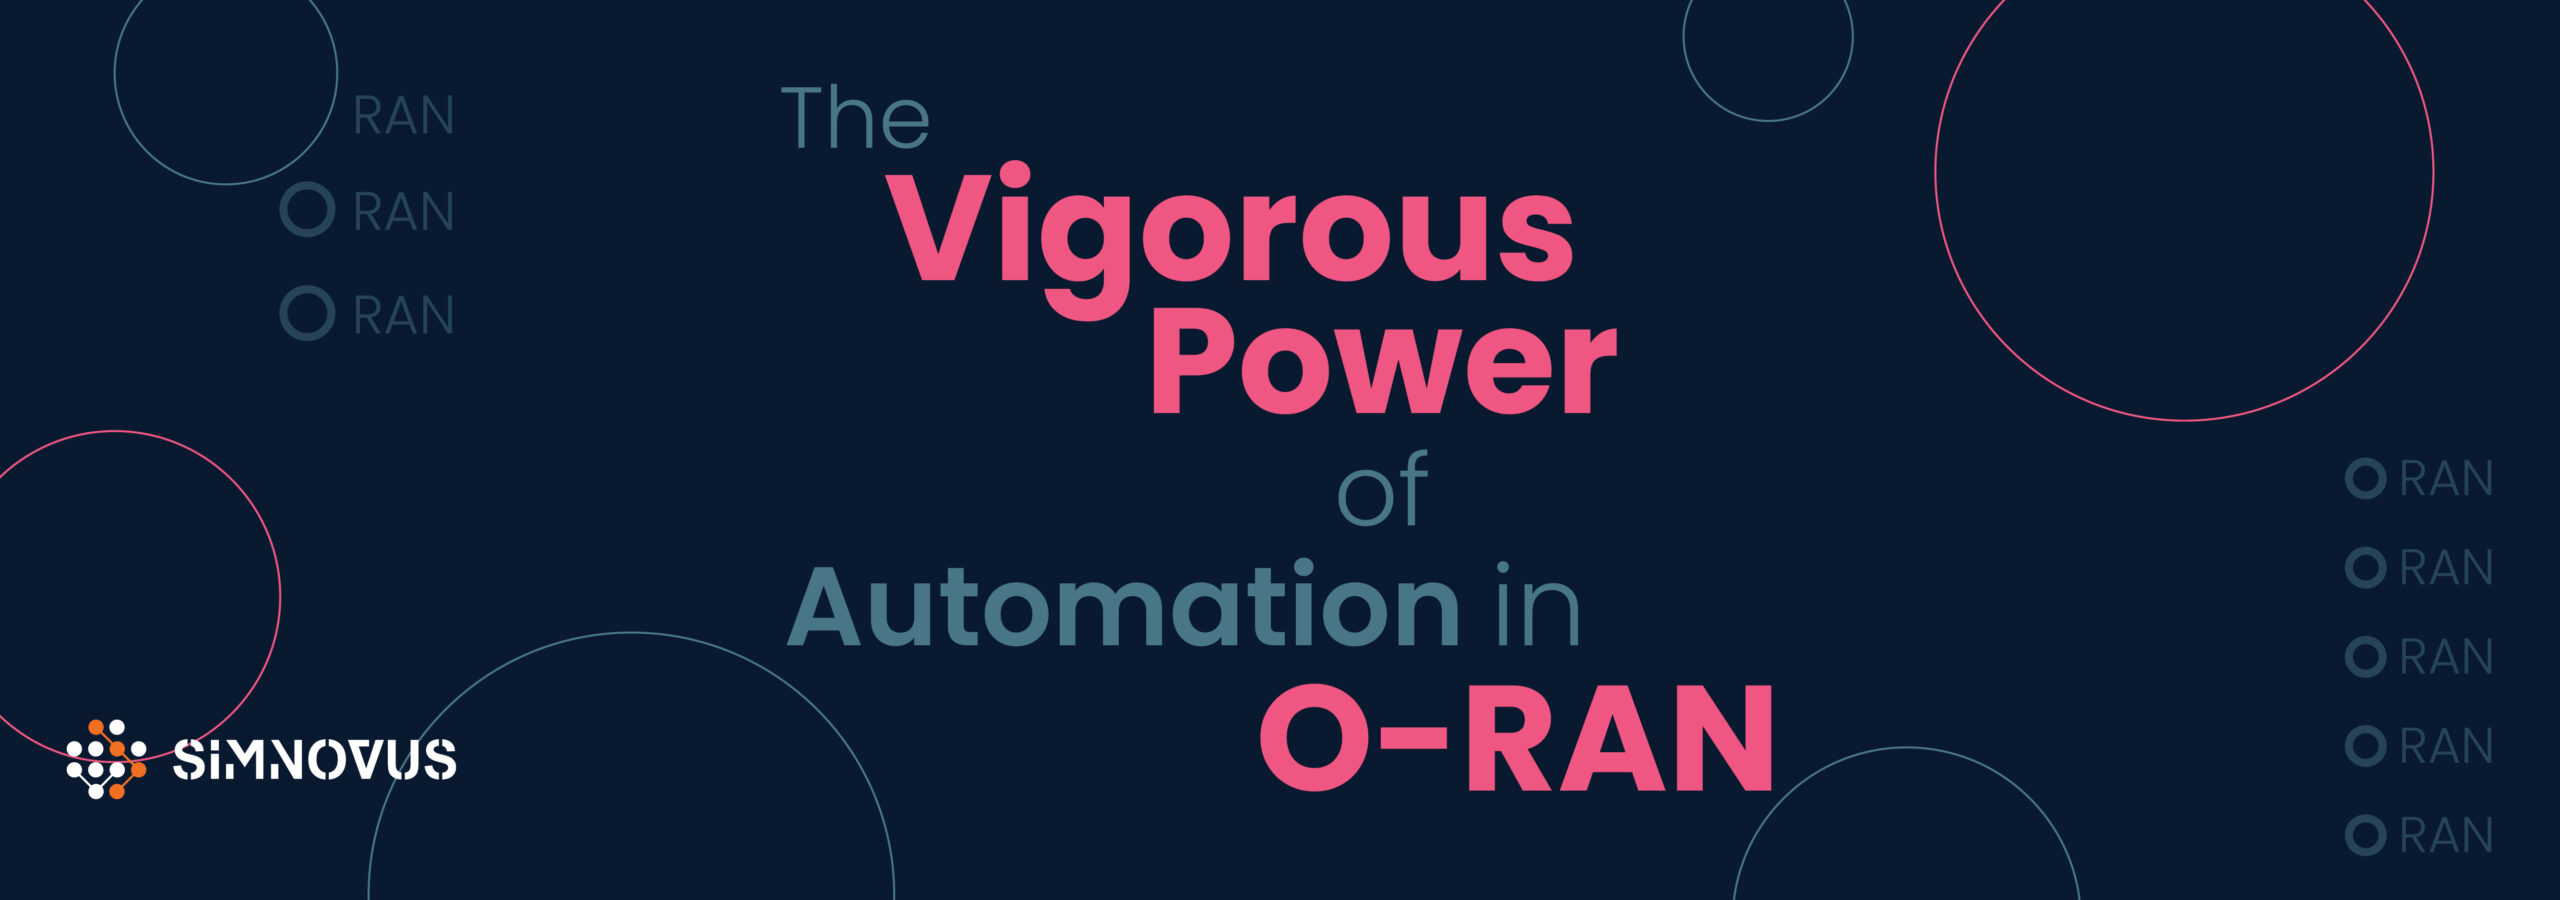 power-of-automation-in-open-ran